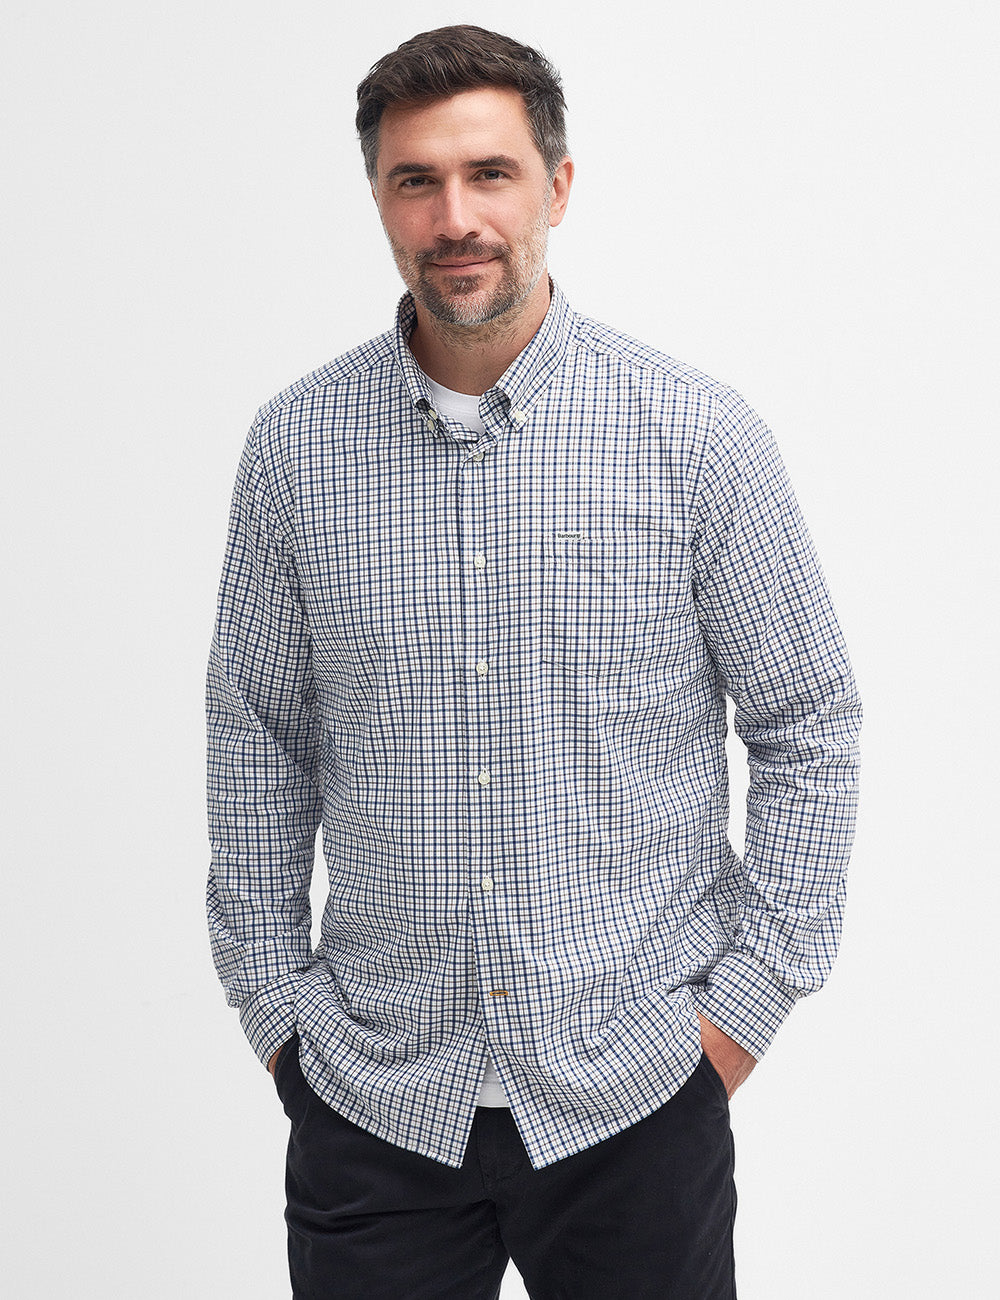 Barbour Teesdale Performance Shirt - Navy